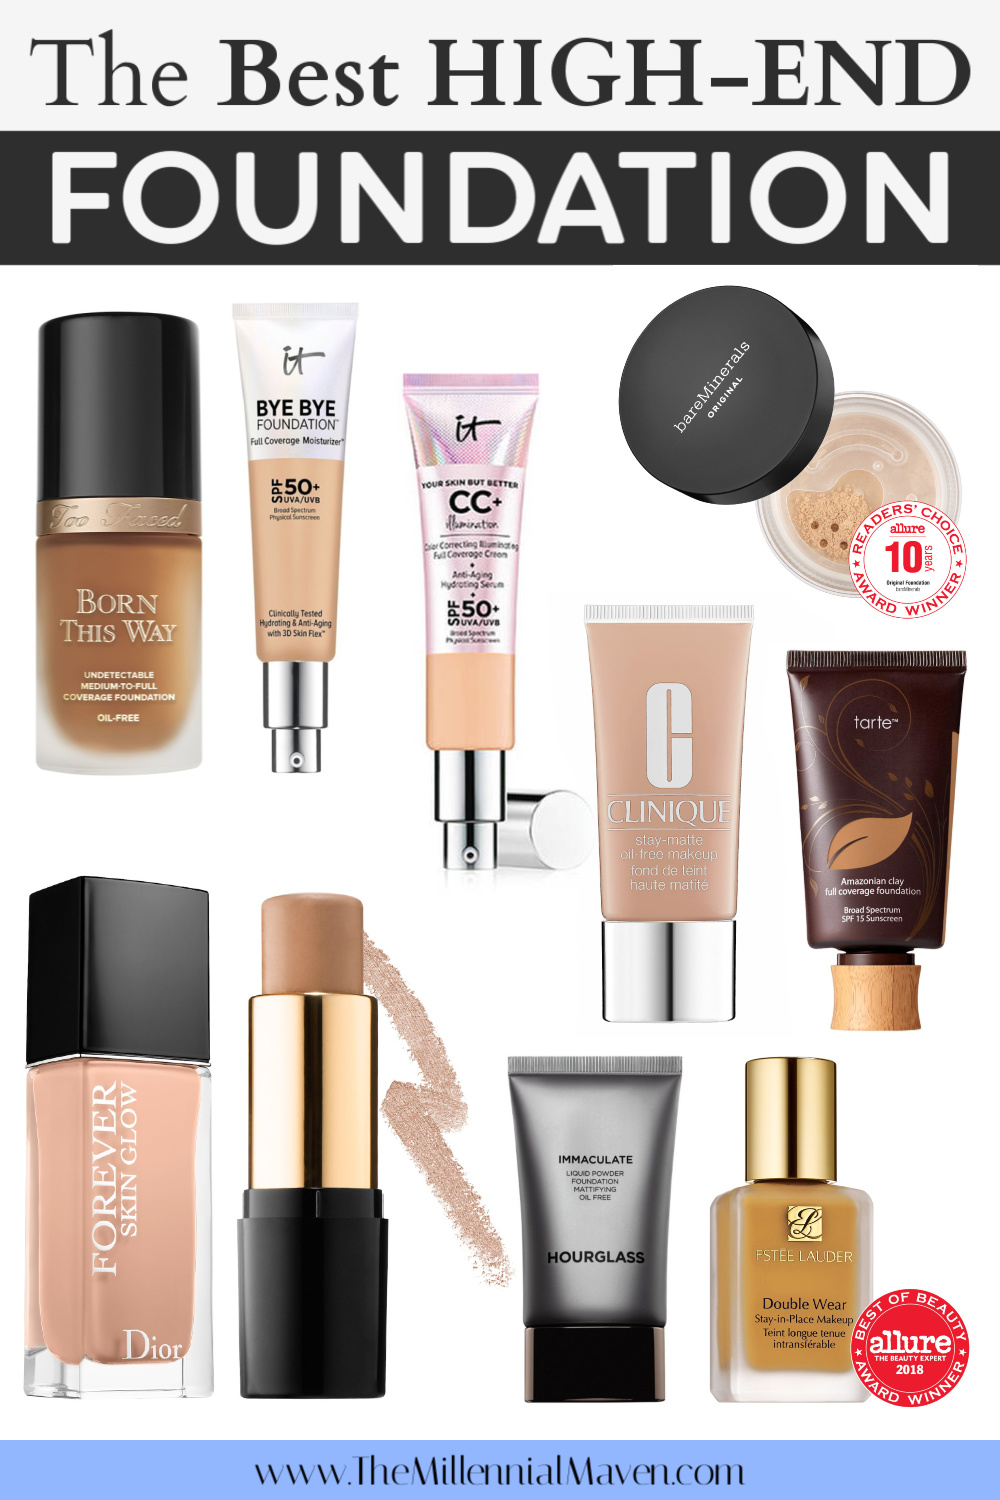 *UPDATED 2020* My 10 Favorite High-End Foundations For All Skin Types (Best Foundations)